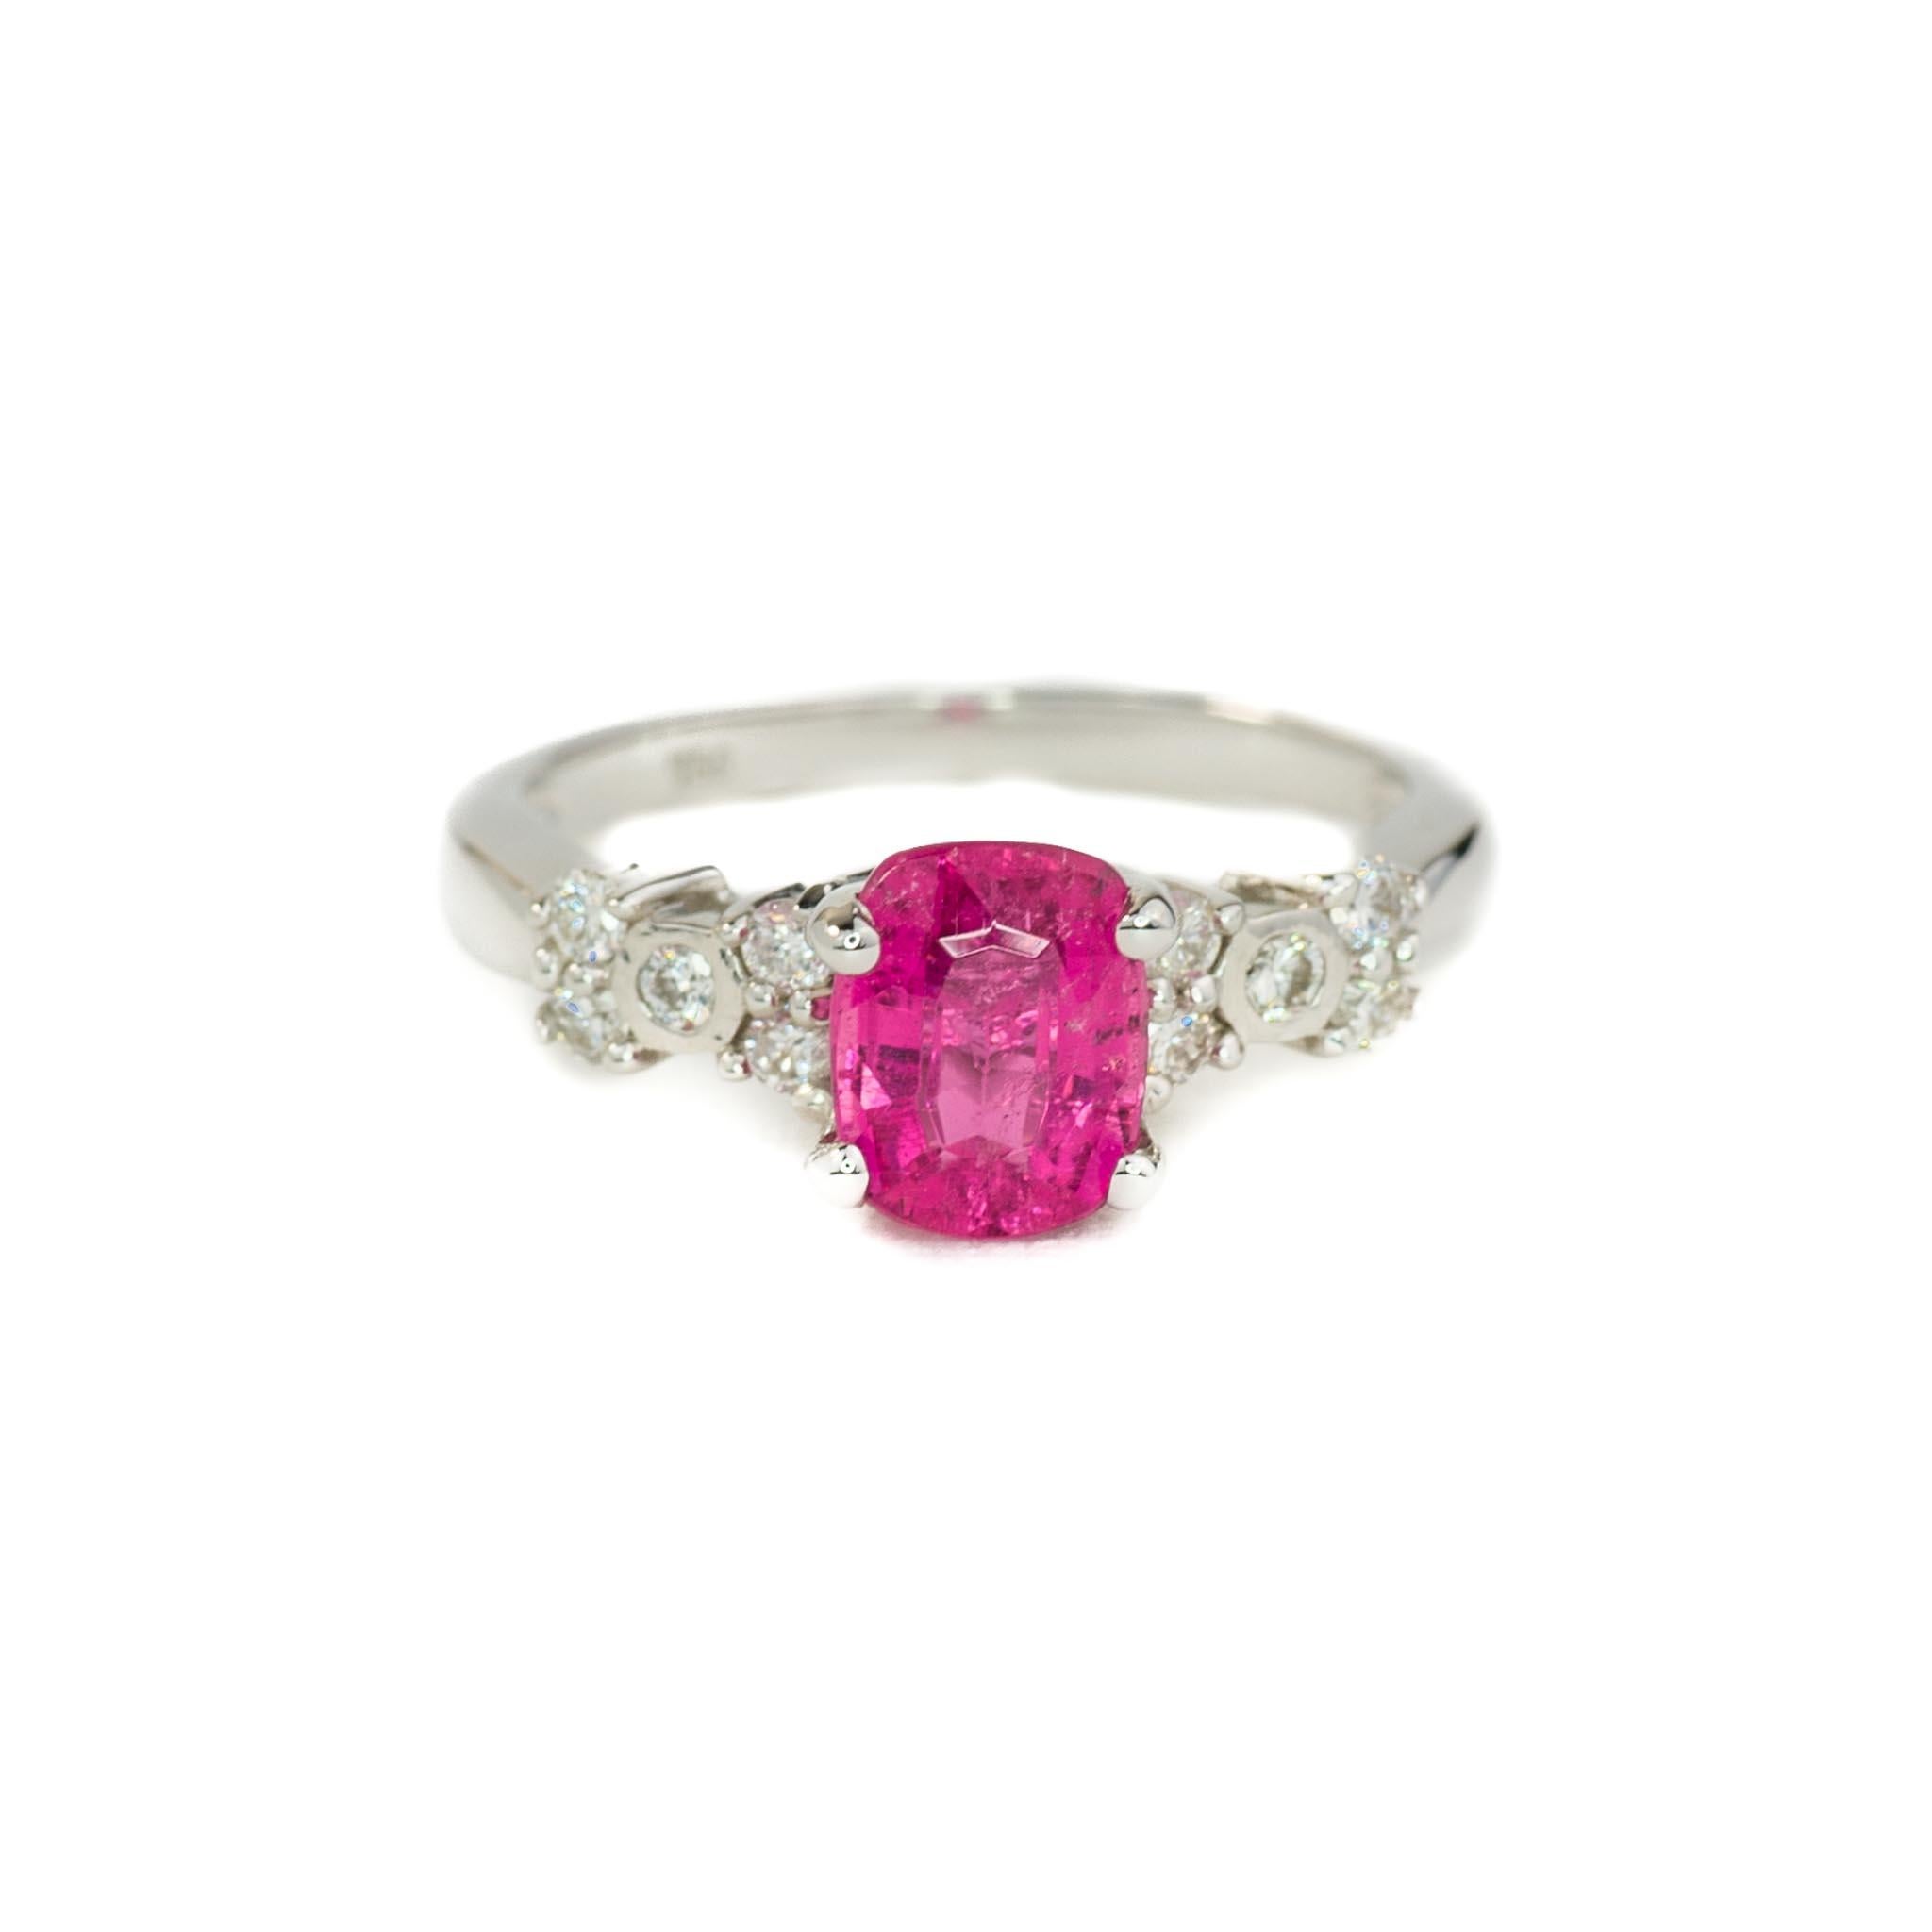 Pink Tourmaline Flower Diamond Ring

Details:
1 ct Tourmaline
0.20 ct diamond
14k Solid Rose Gold


🔍 All diamonds and gems are authenticated by a GIA gemologist

📦 Ready to Ship in 7-10 Business Days
~ Handmade
~ Made to Order

❓ If you have